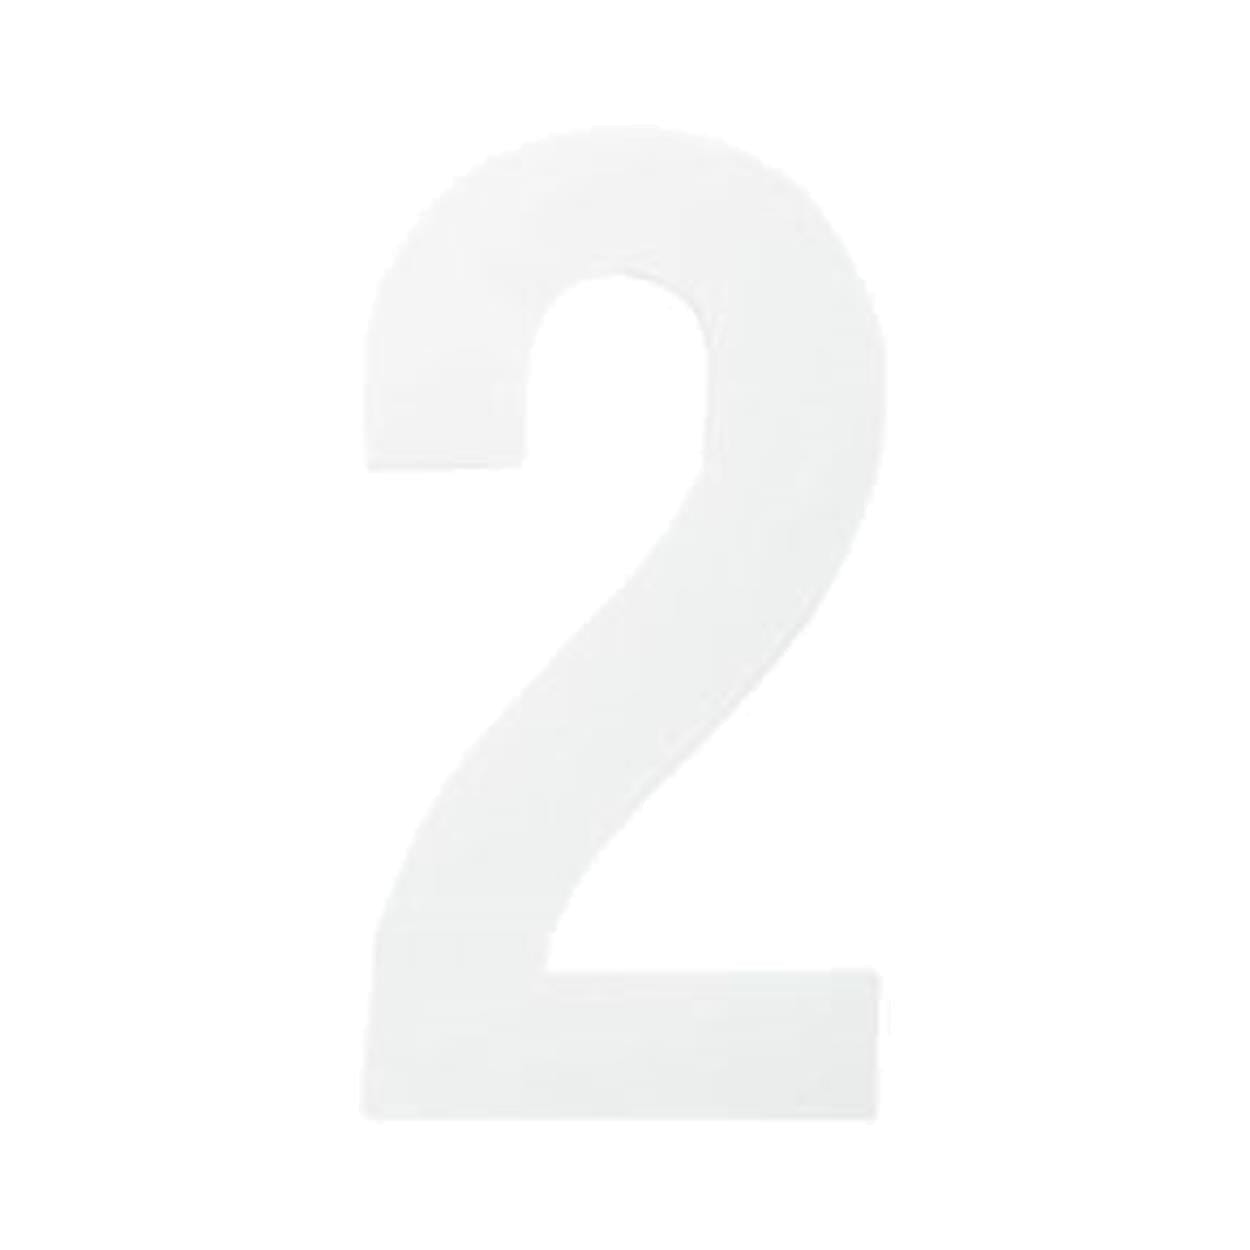 Best Hardware - Small White Vinyl Numeral No.2 Door Numerals | Snape & Sons